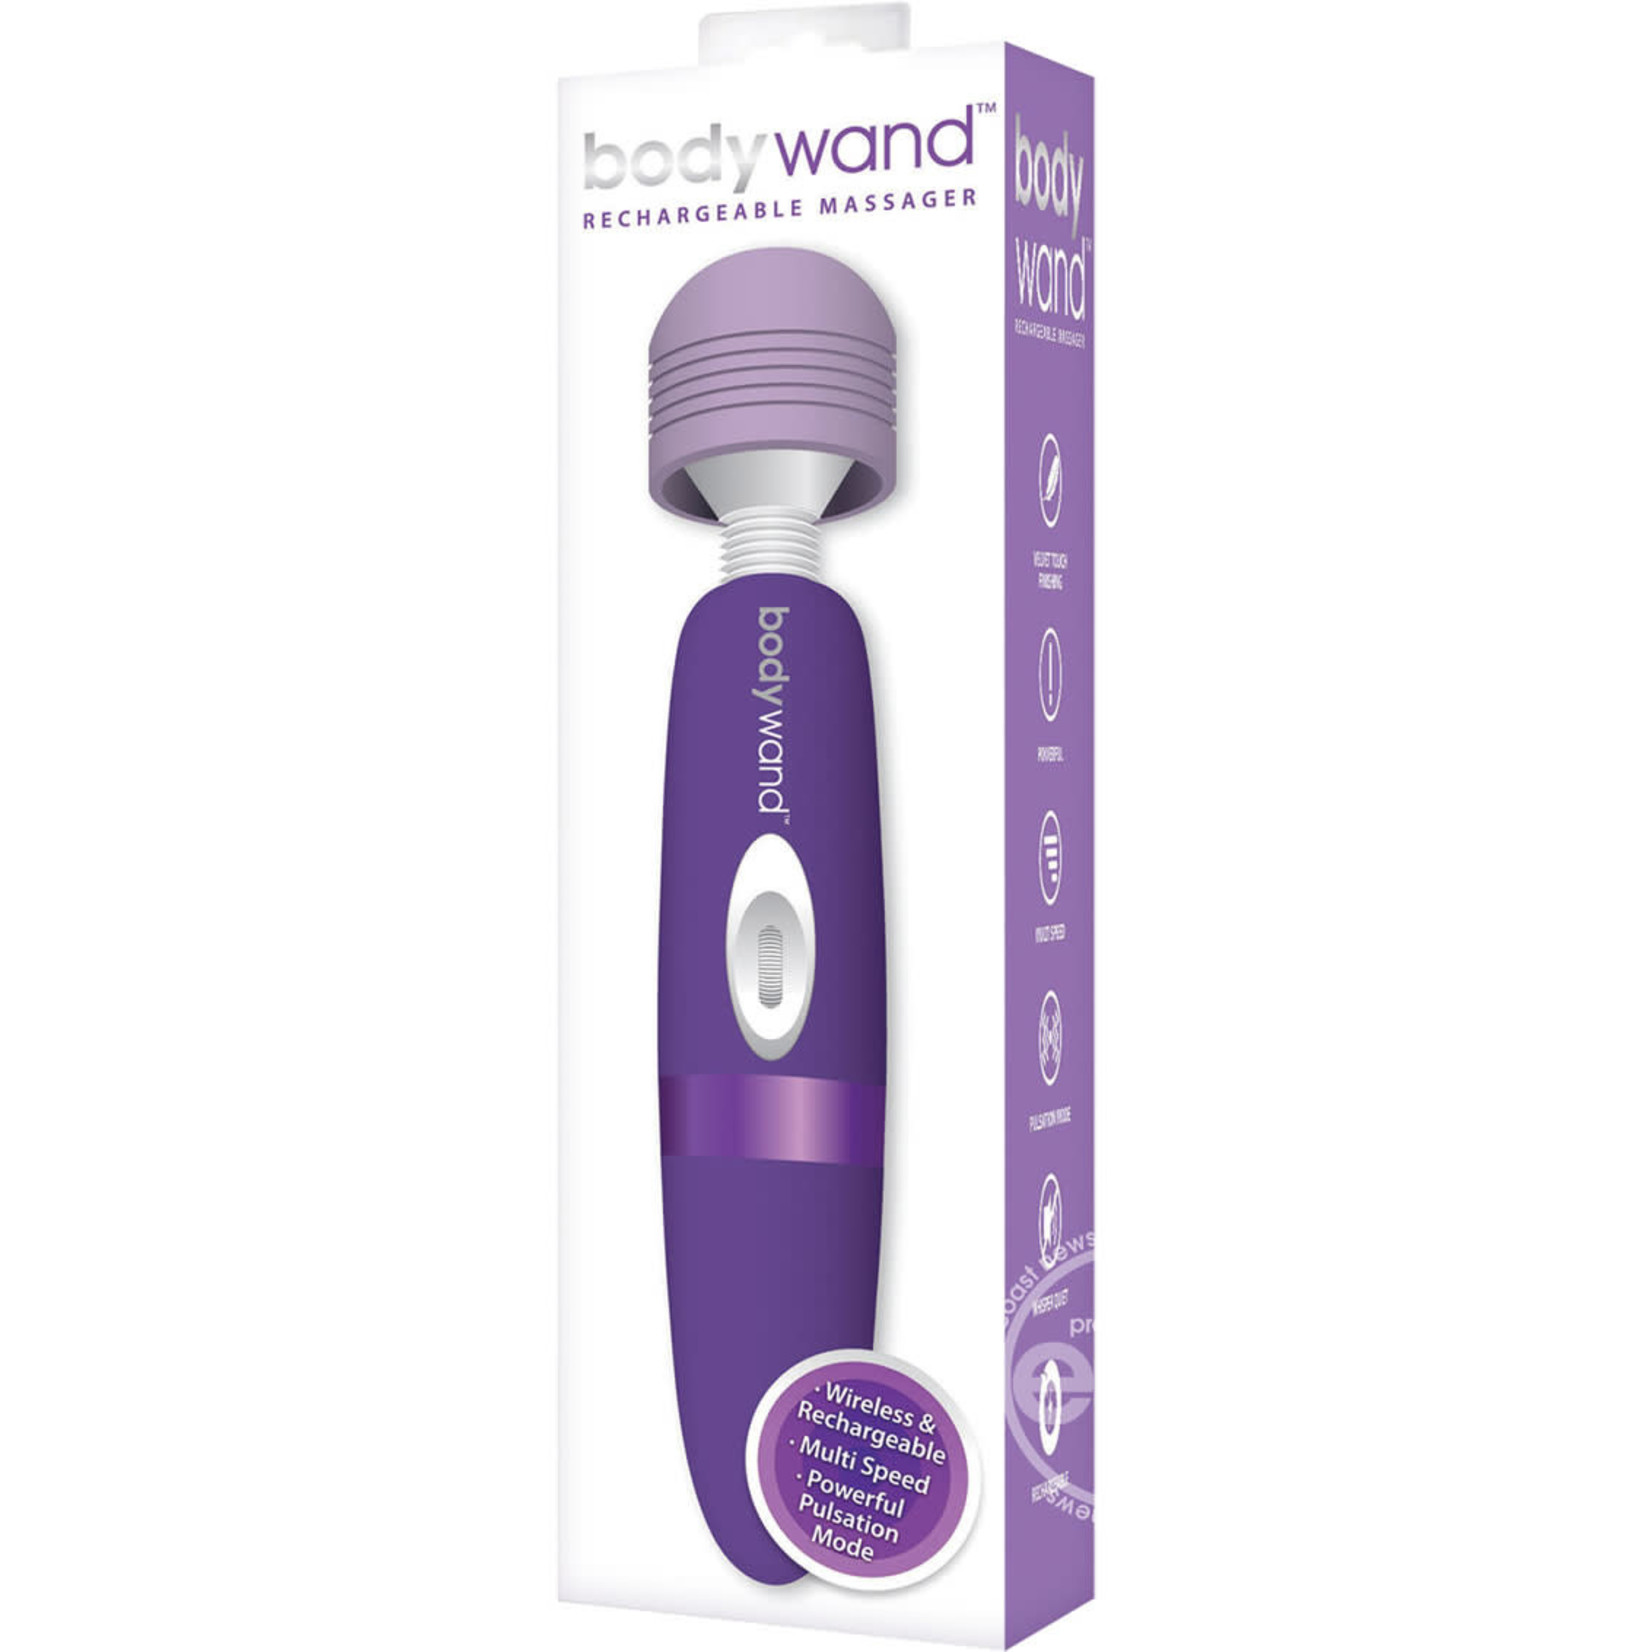 Bodywand Rechargeable Massager-Lavender